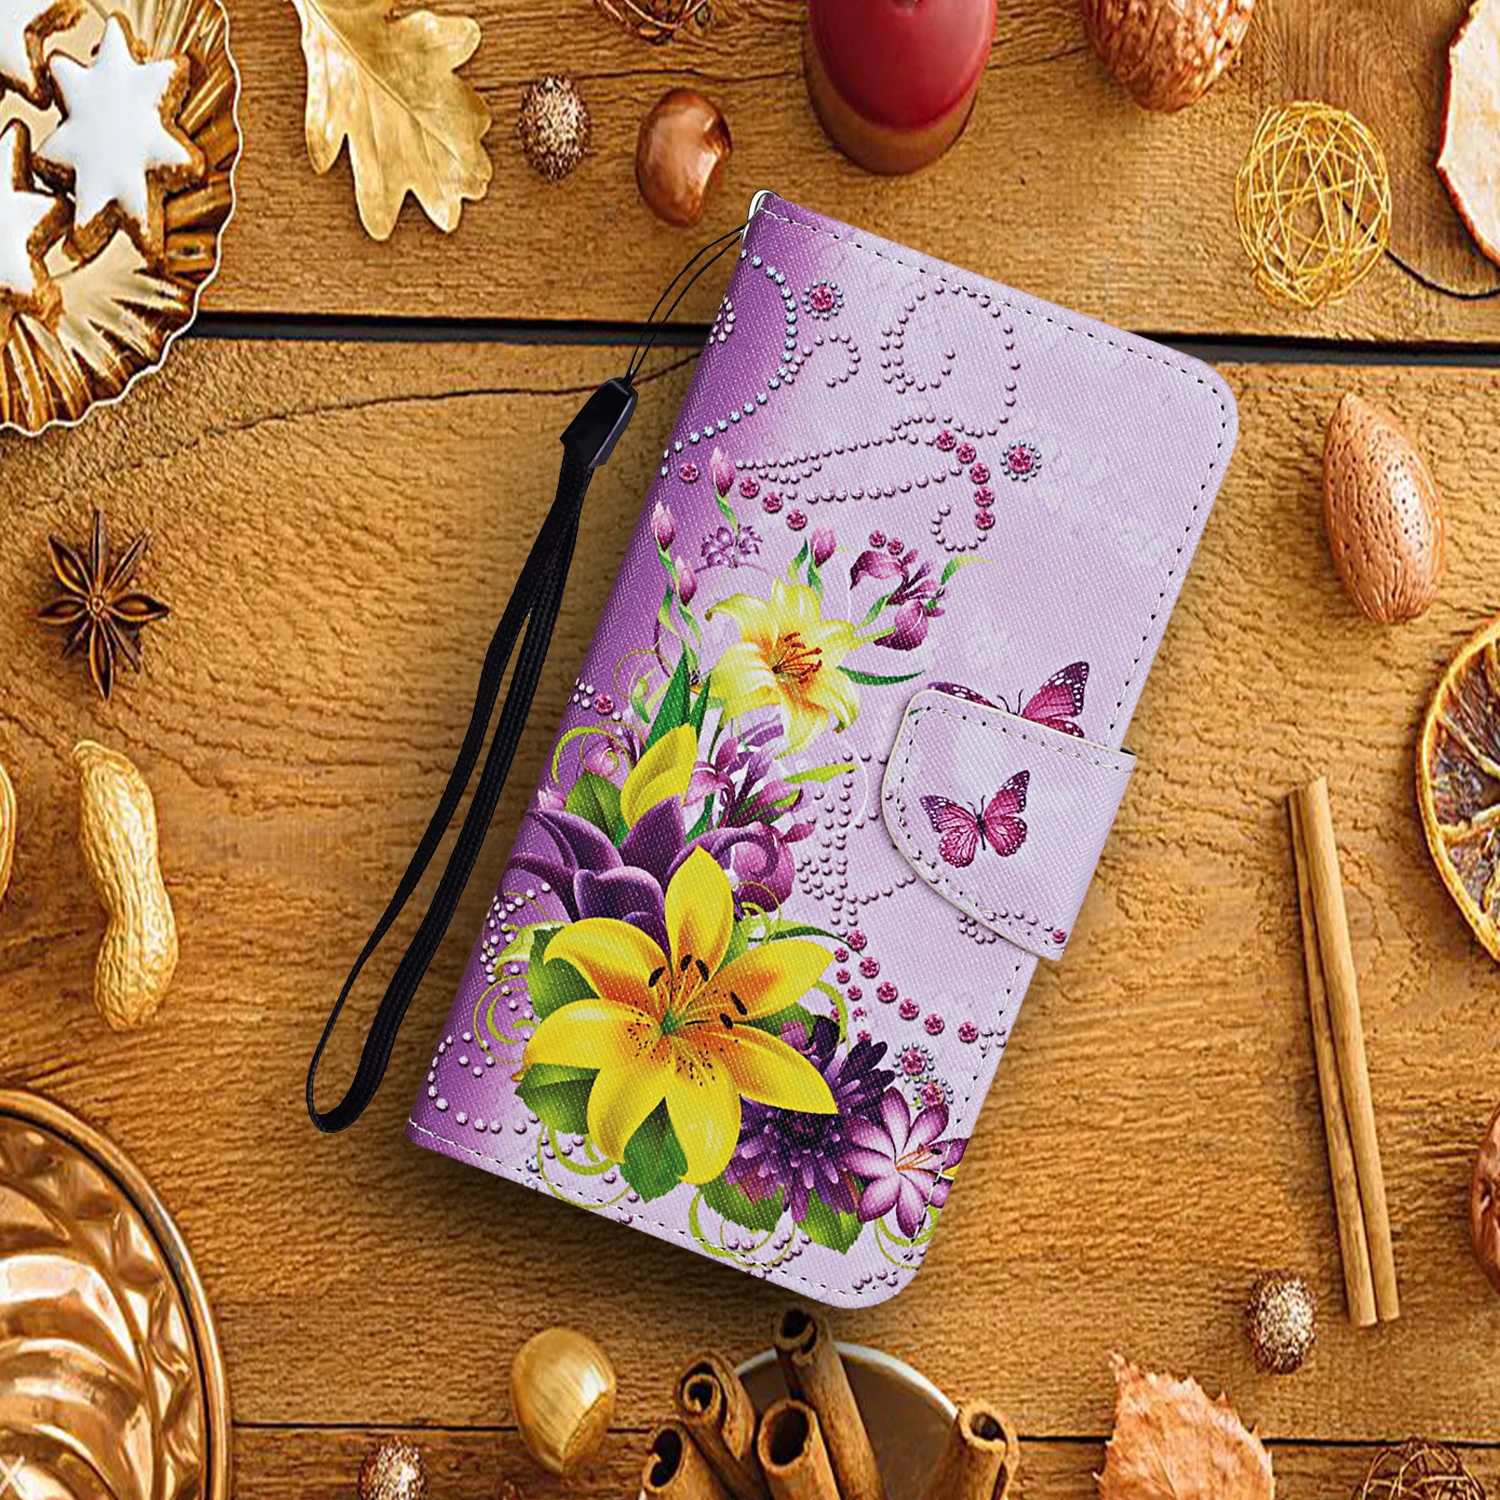 xiaomi leather case hard Leather Case For Xiaomi Mi 10T 10 T 5G Case For Xiomi Mi10T Pro Lite Mi Note 10 Pro Note10 Lite Case Flip Wallet Painted Cover xiaomi leather case case